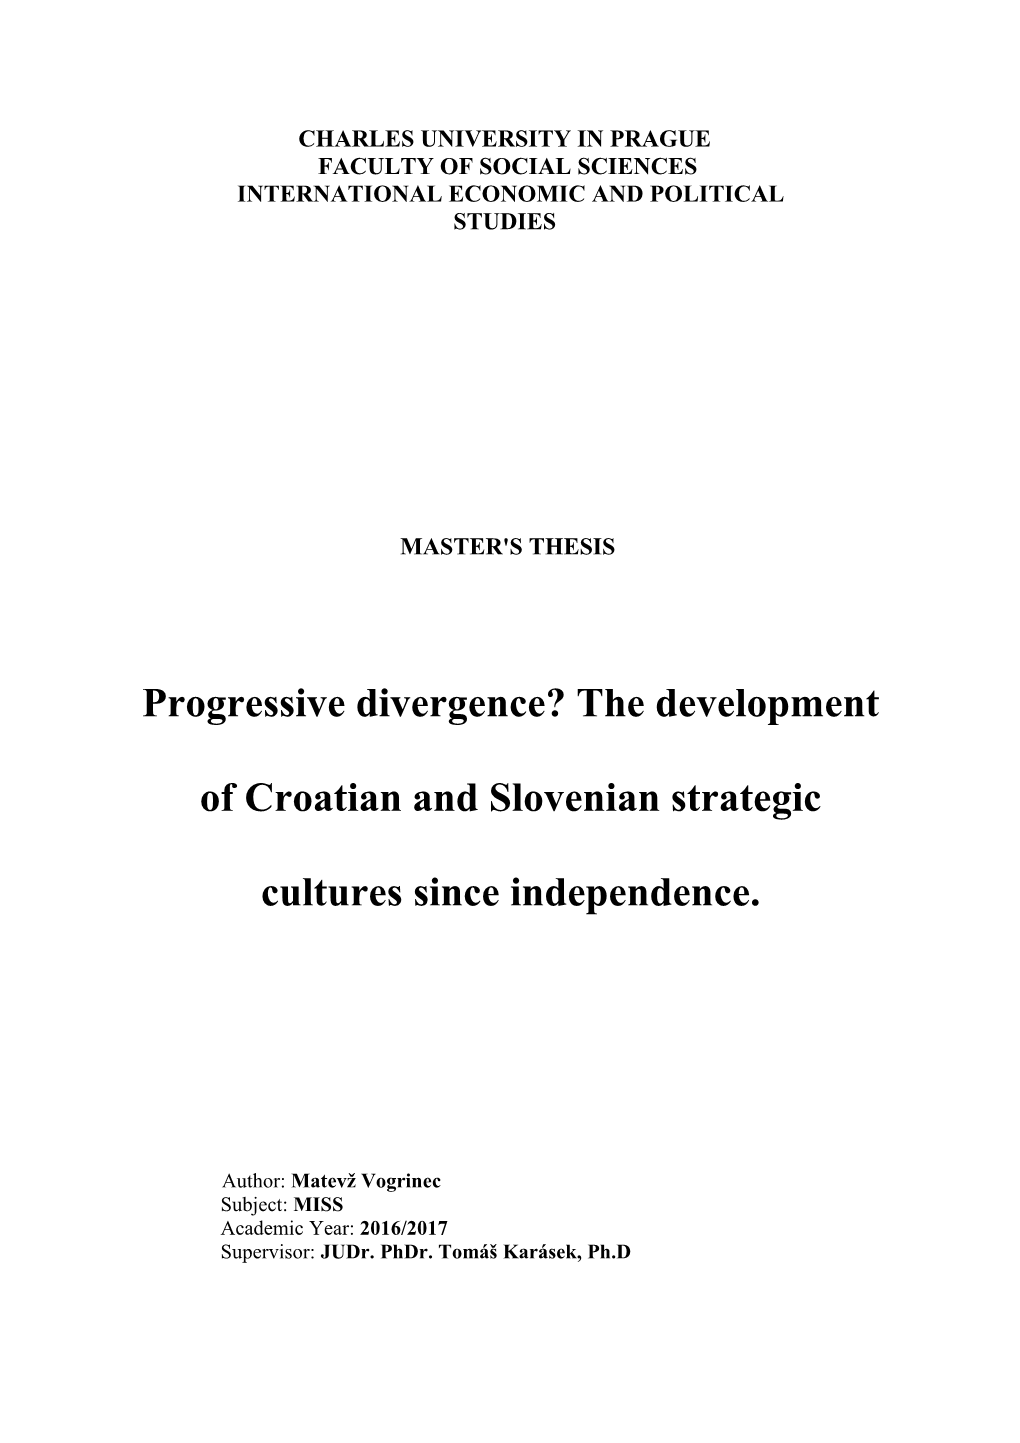 The Development of Croatian and Slovenian Strategic Cultures Since